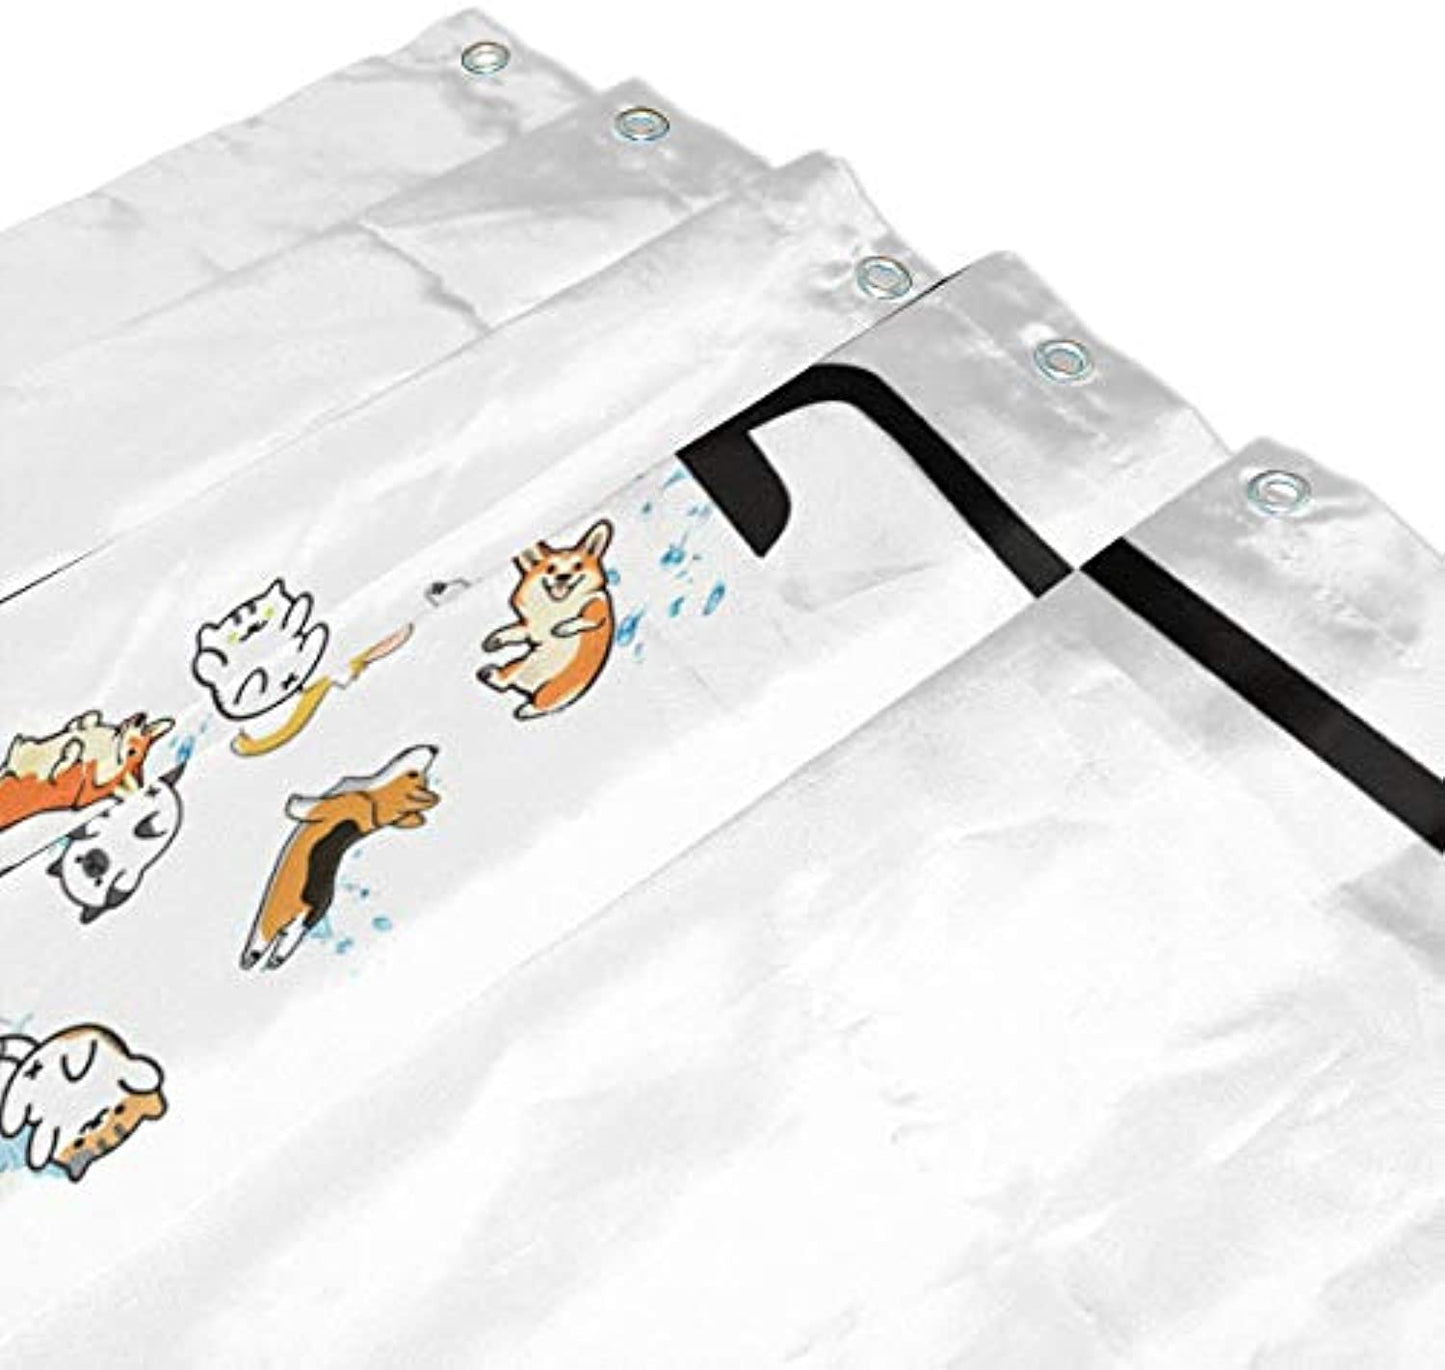 Raining Cats and Dogs Shower Curtain for Kids Cartoon Corgi Animal Shower Curtains for Bathroom Accessories 3D Printing Hilarious Pets Playing Water Design Bath Decor 72x72 with 12 Hooks